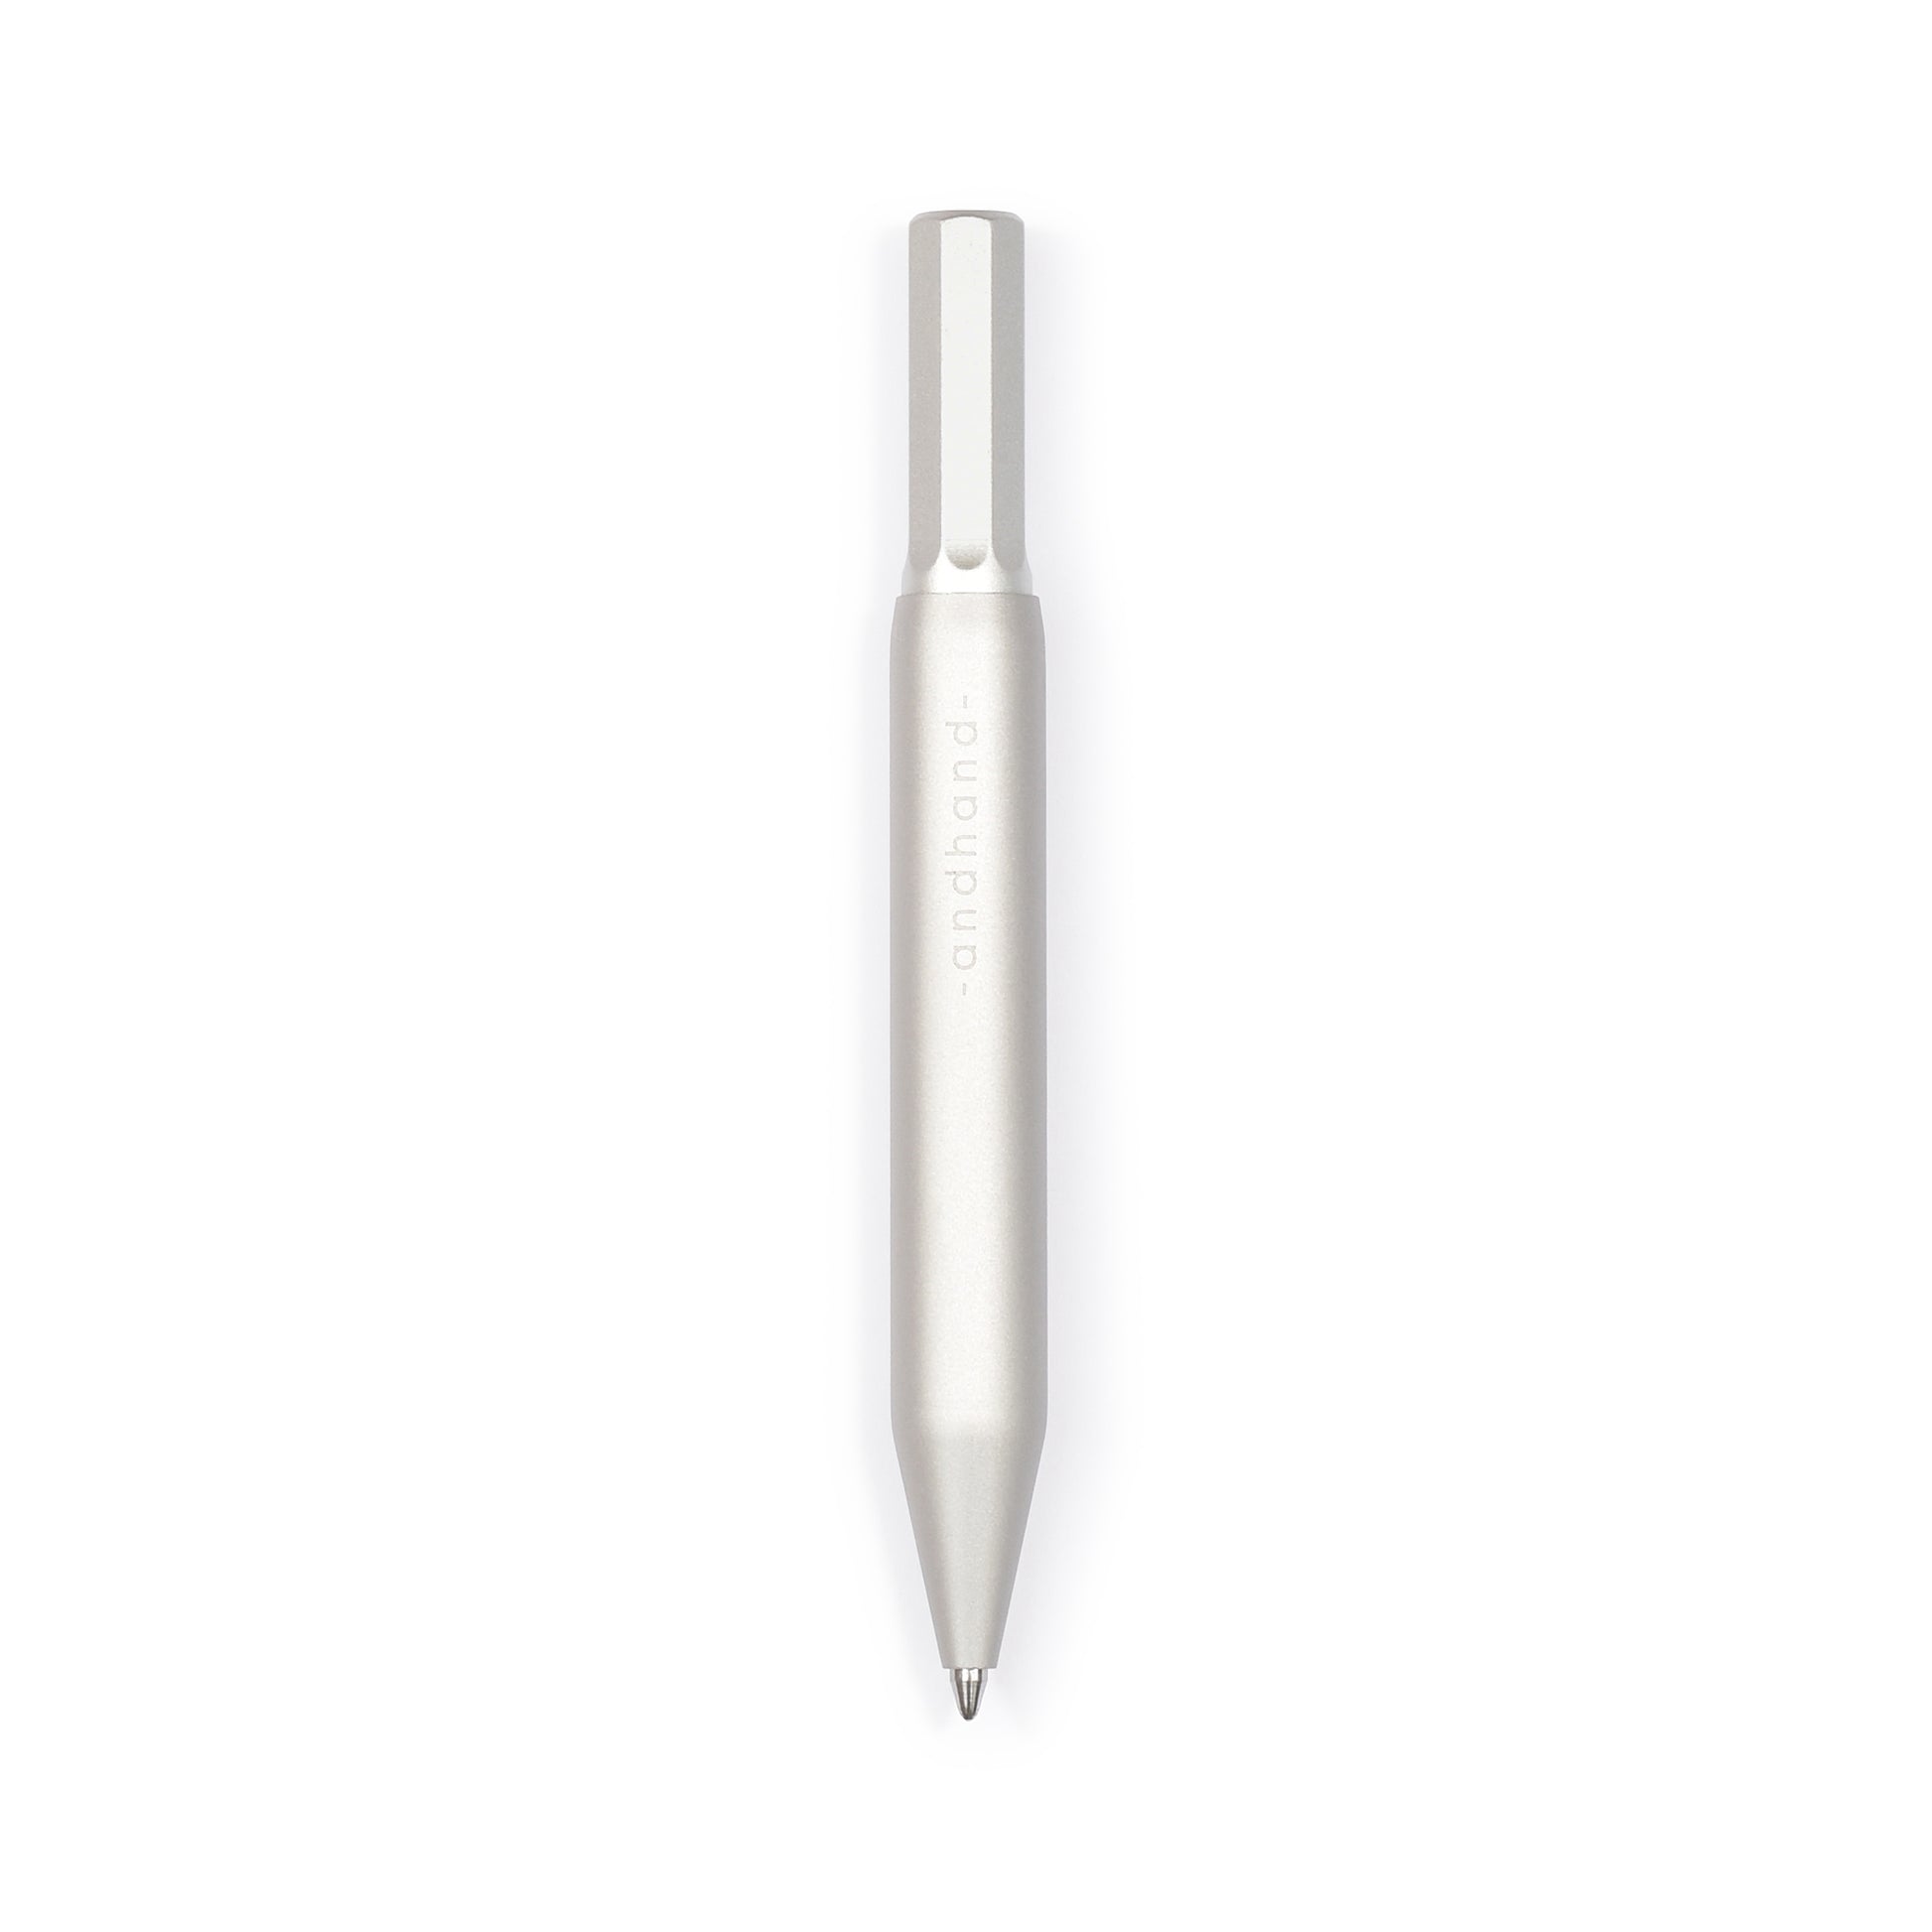 Aluminium and brass everyday carry ballpoint pen from Andhand. An expert compact writing tool with a smooth mechanism and modern minimal design. Amazingly durable and refined 4 inch pen. Shown here in silver lustre anodized finish.